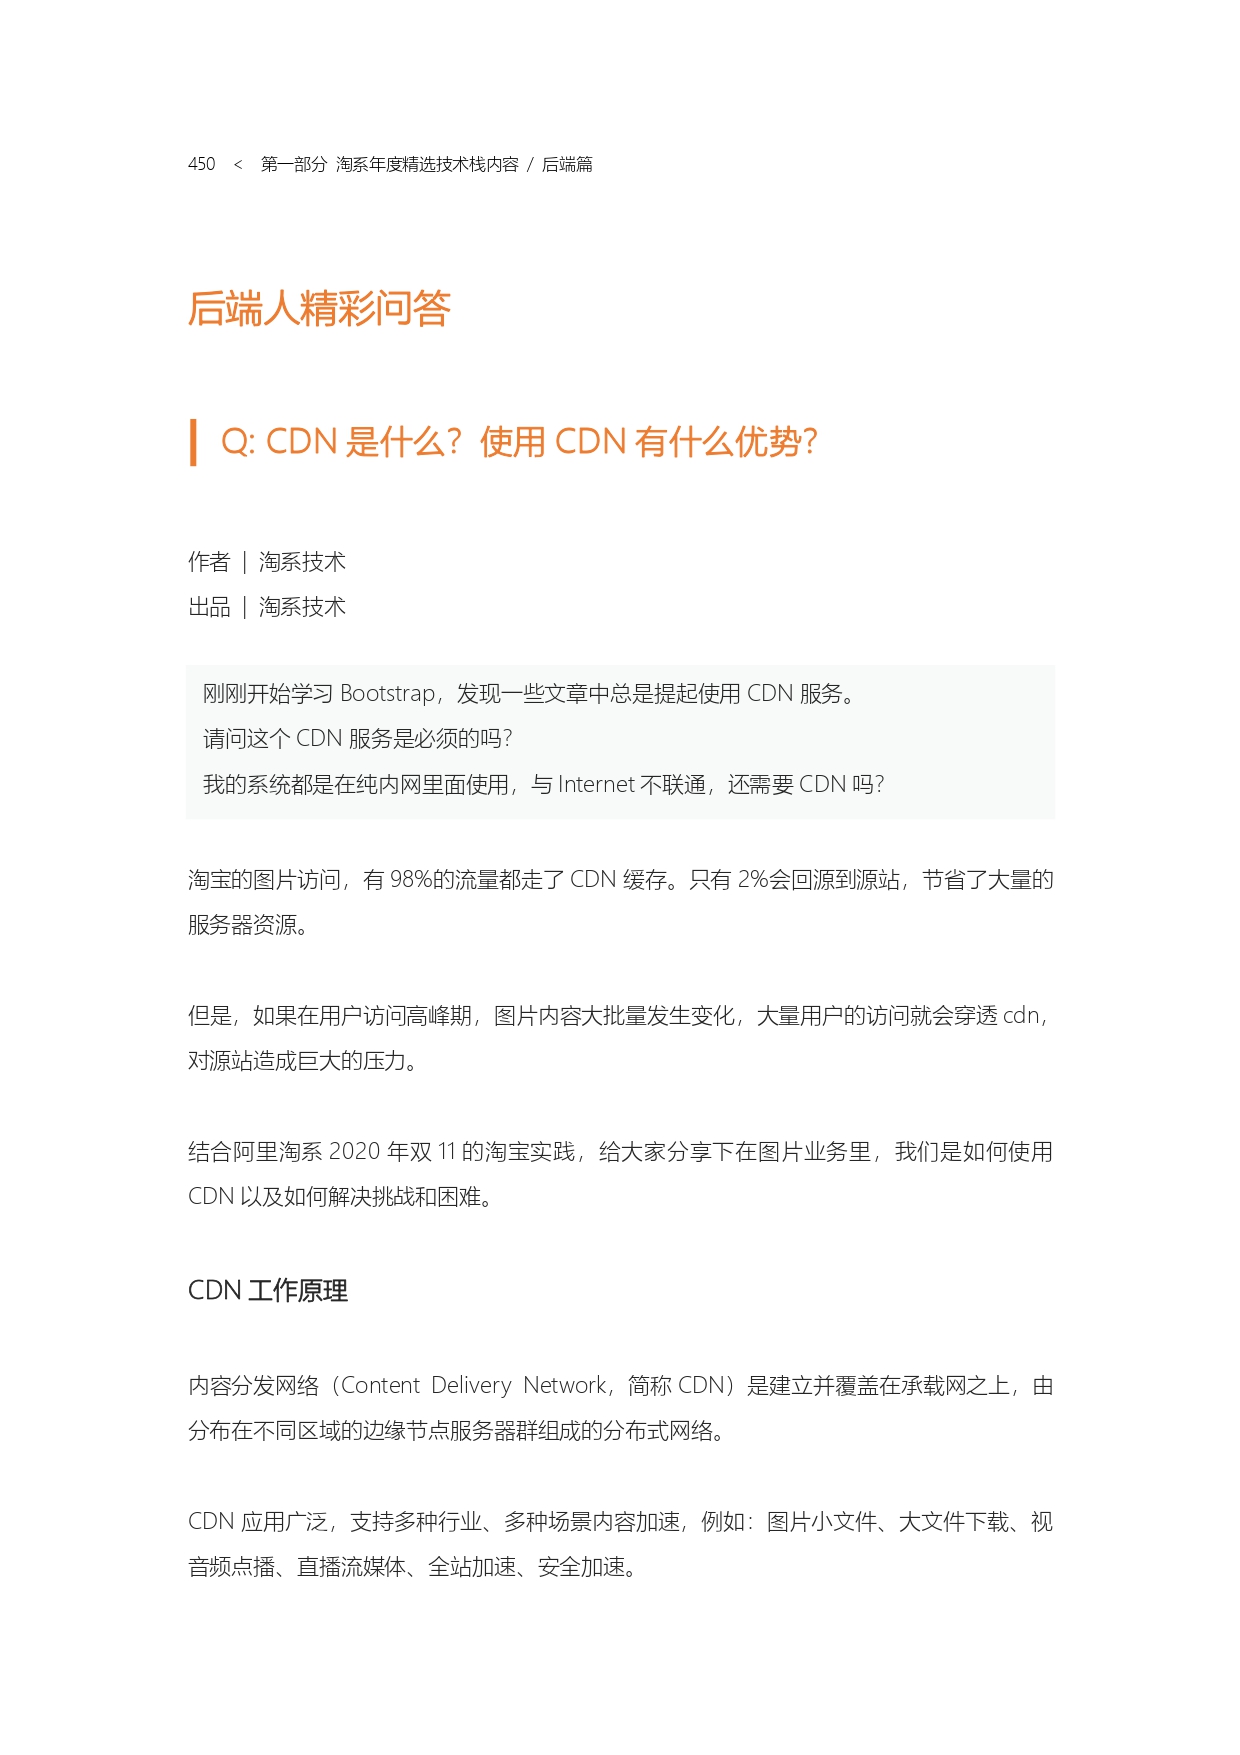 The Complete Works of Tao Technology 2020-1-570_page-0450.jpg